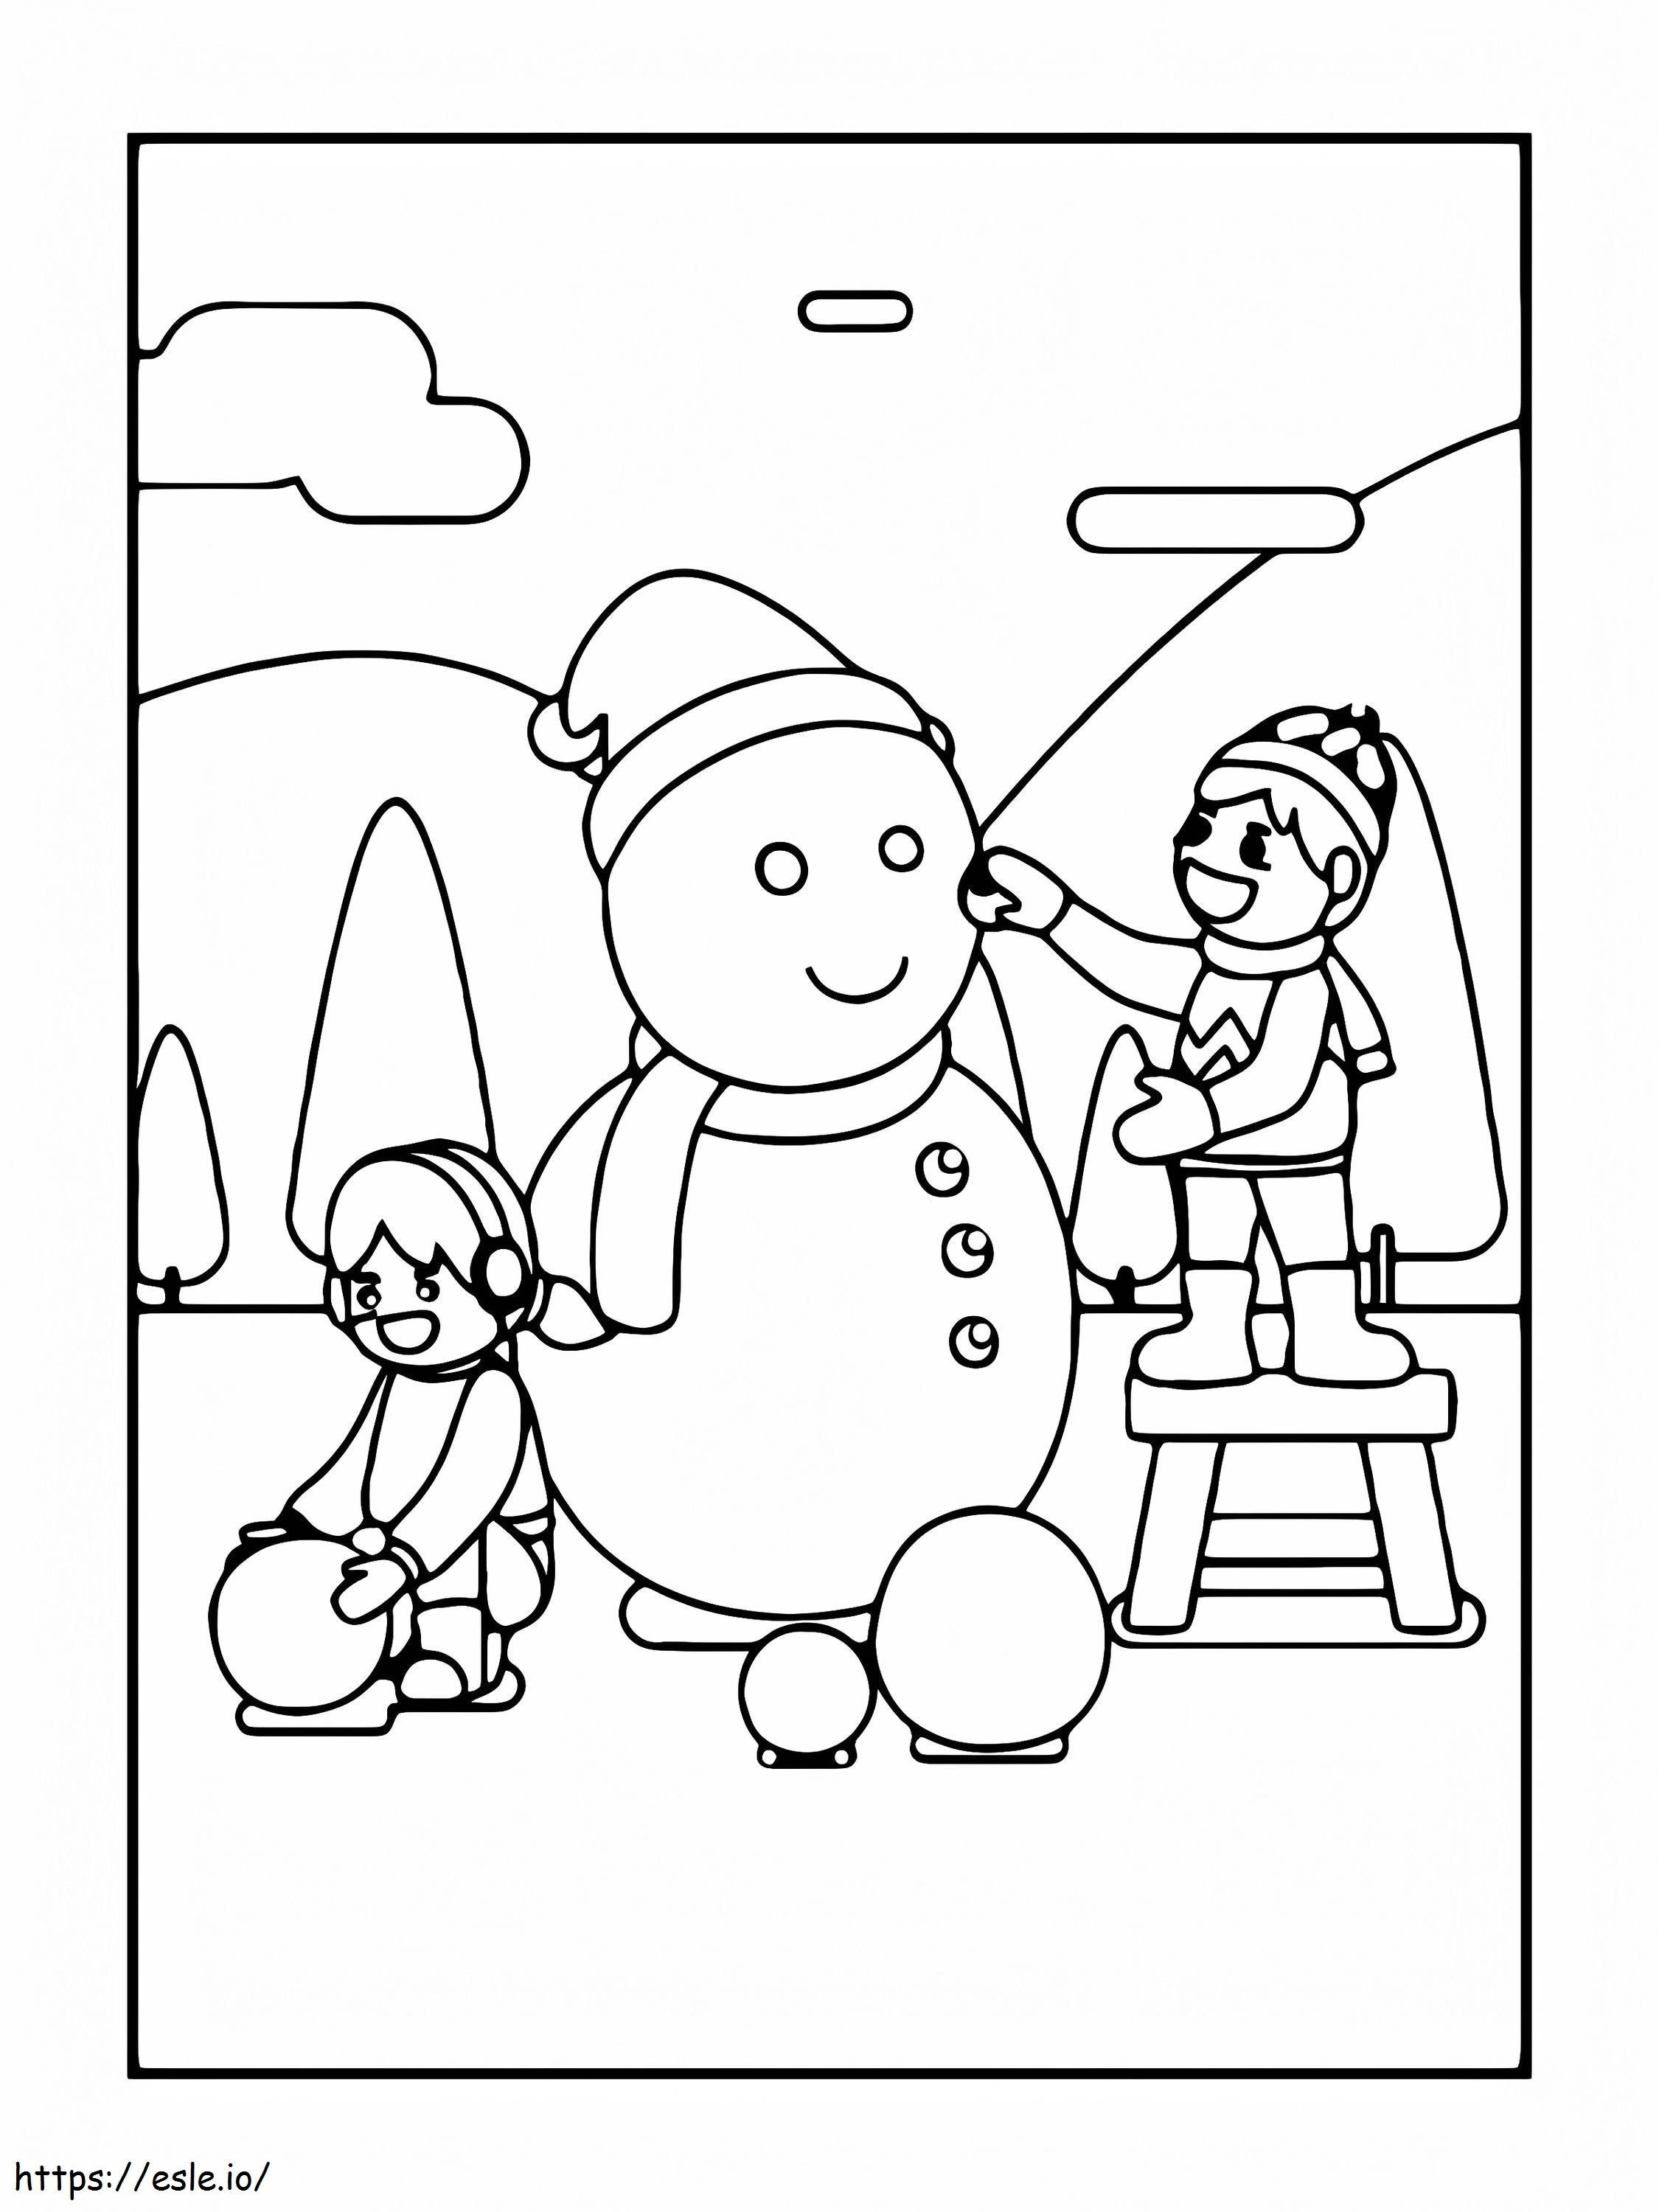 Christmas Snowman Creation coloring page